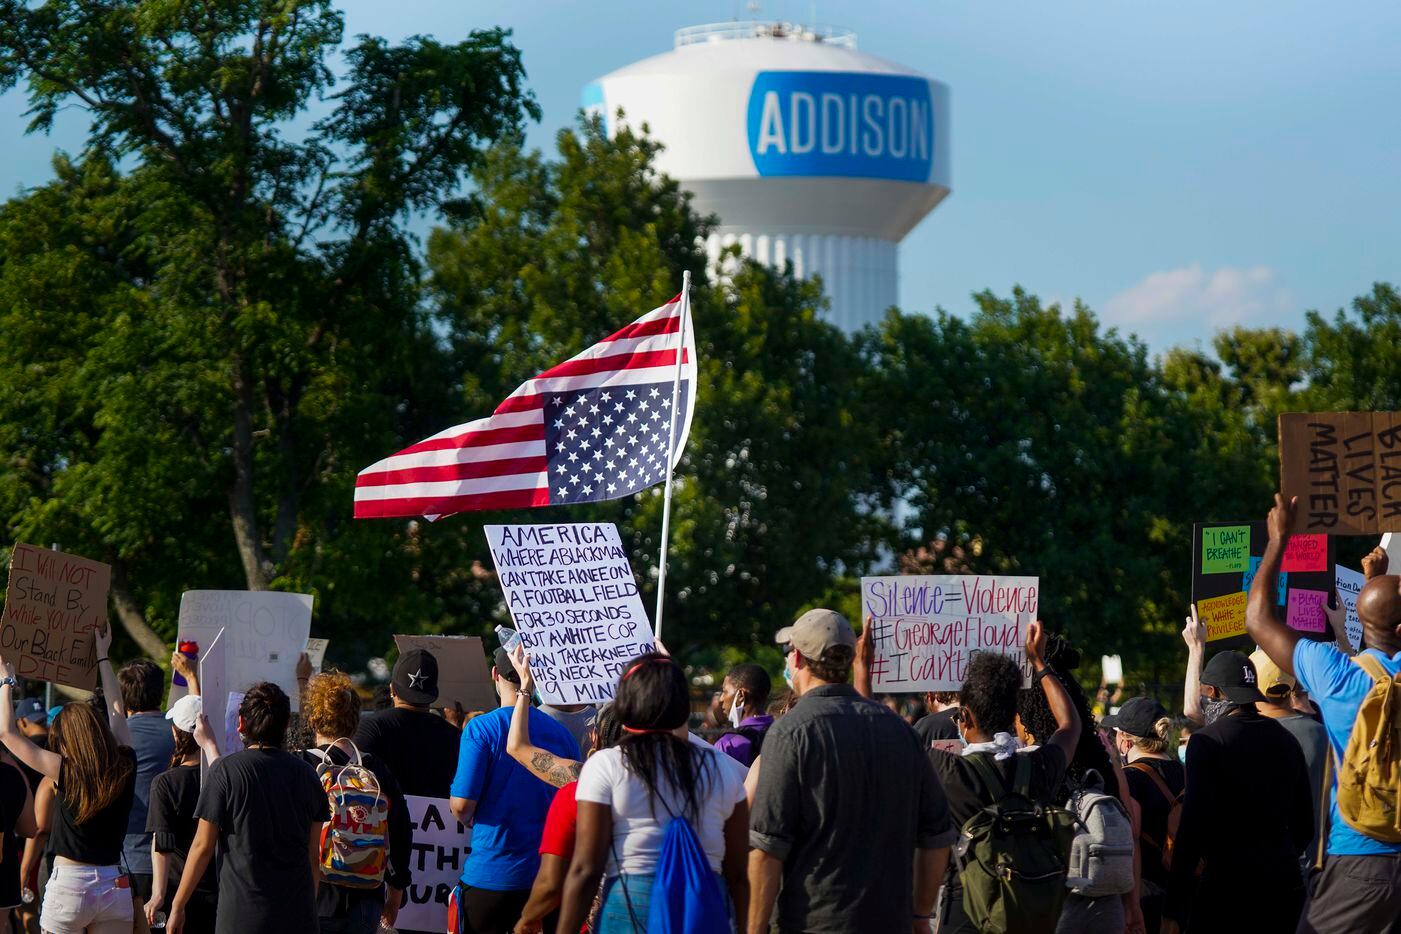 Demonstrators march on the Addison Road toward Addison Circle Park during a protest on Thursday, June 4, 2020, in Addison. Protests continued Thursday in the response to the death of George Floyd.